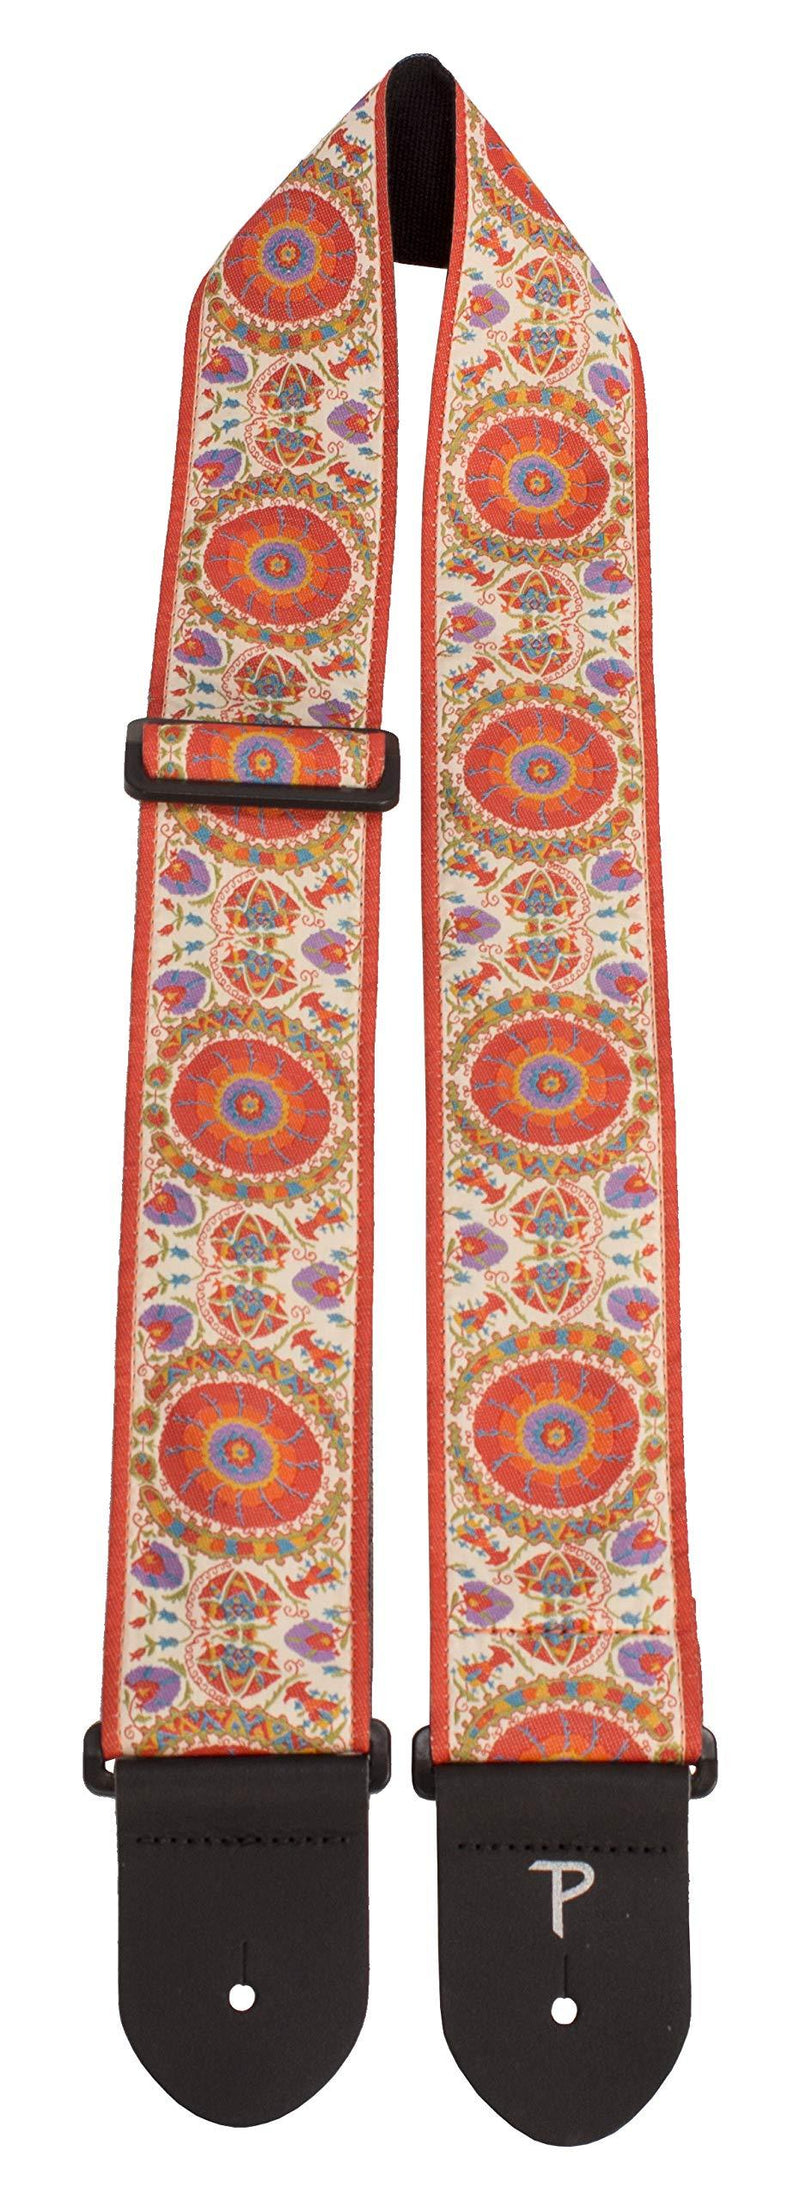 Perri's Leathers Jacquard Guitar Strap with Leather Ends, Orange Mandala Print, Adjustable Length 39" to 58", Stylish, Comfortable, 2.5" Wide